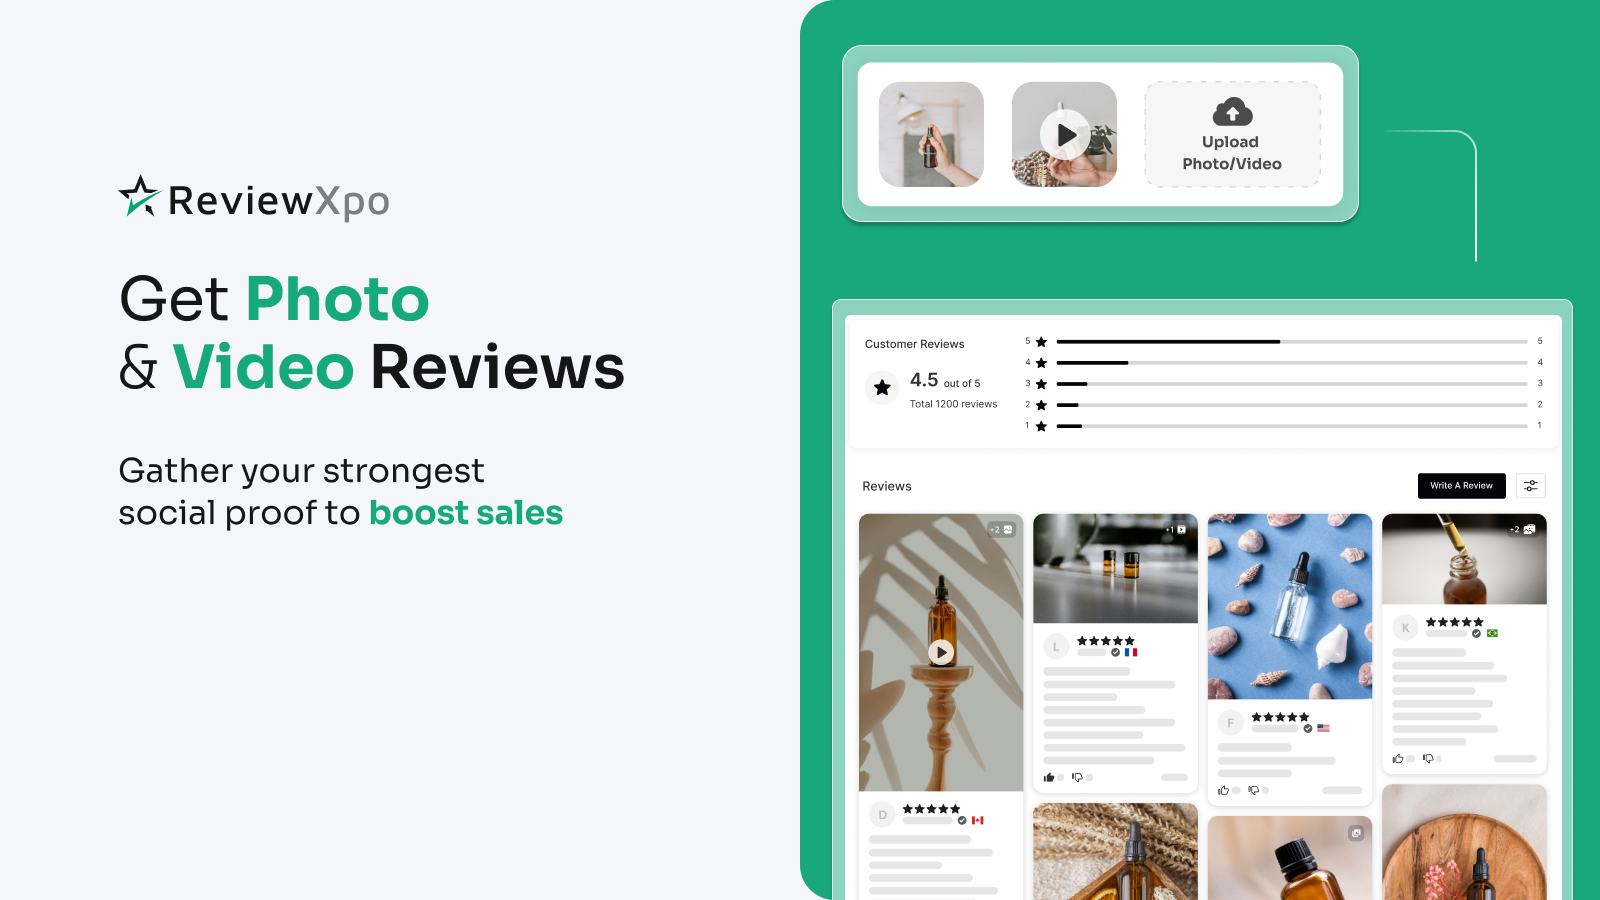 Shopify review app with photo & video